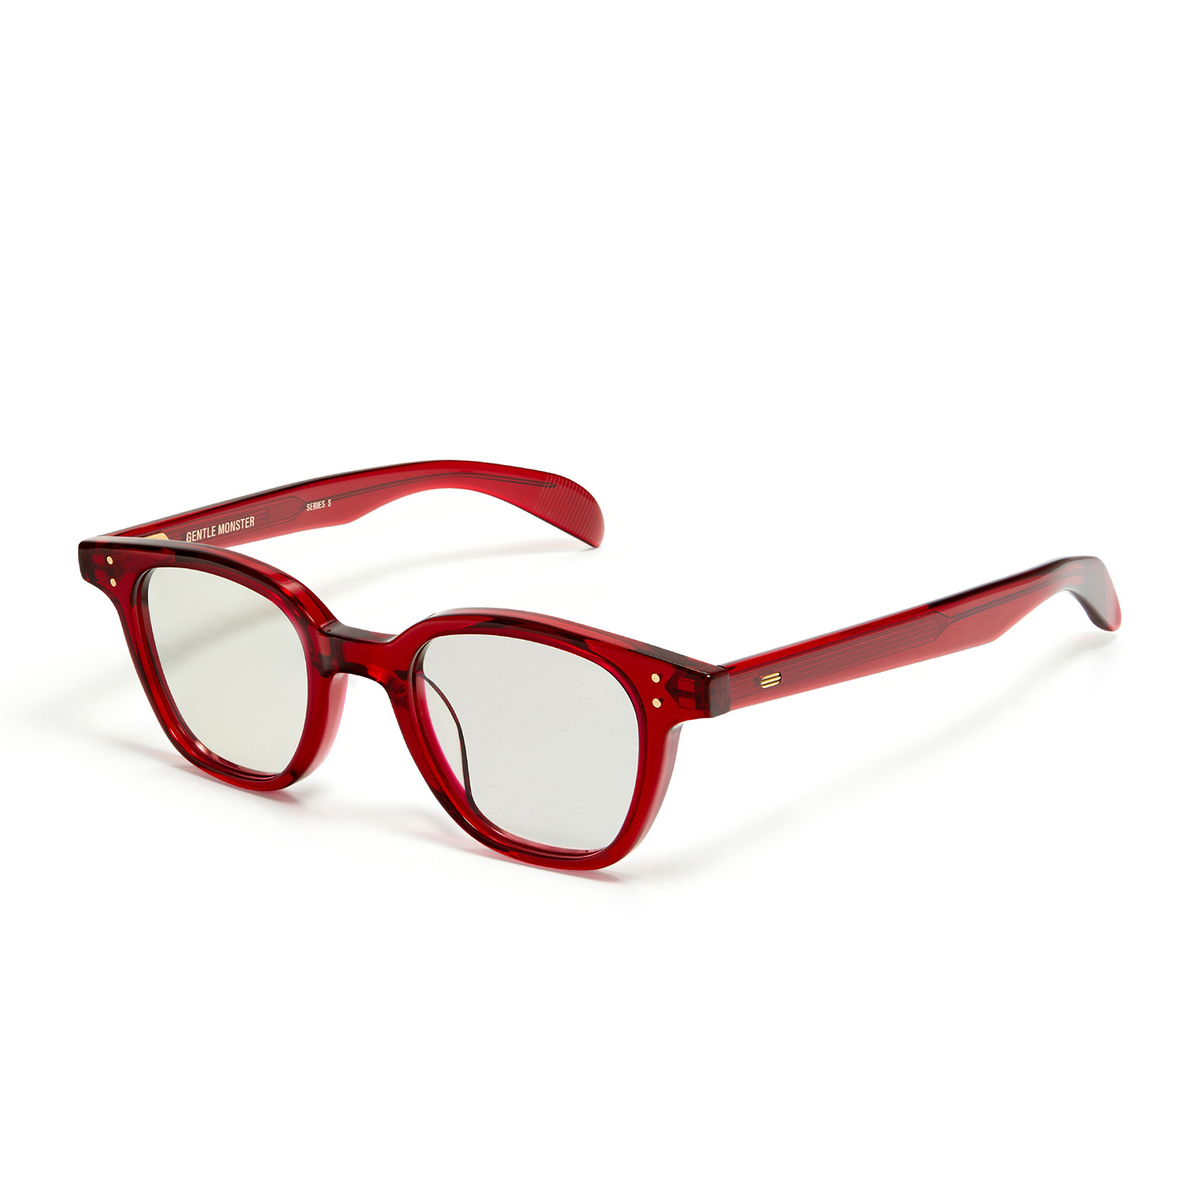 Gentle Monster® Square Eyeglasses: Dadio color RC1 Red - three-quarters view